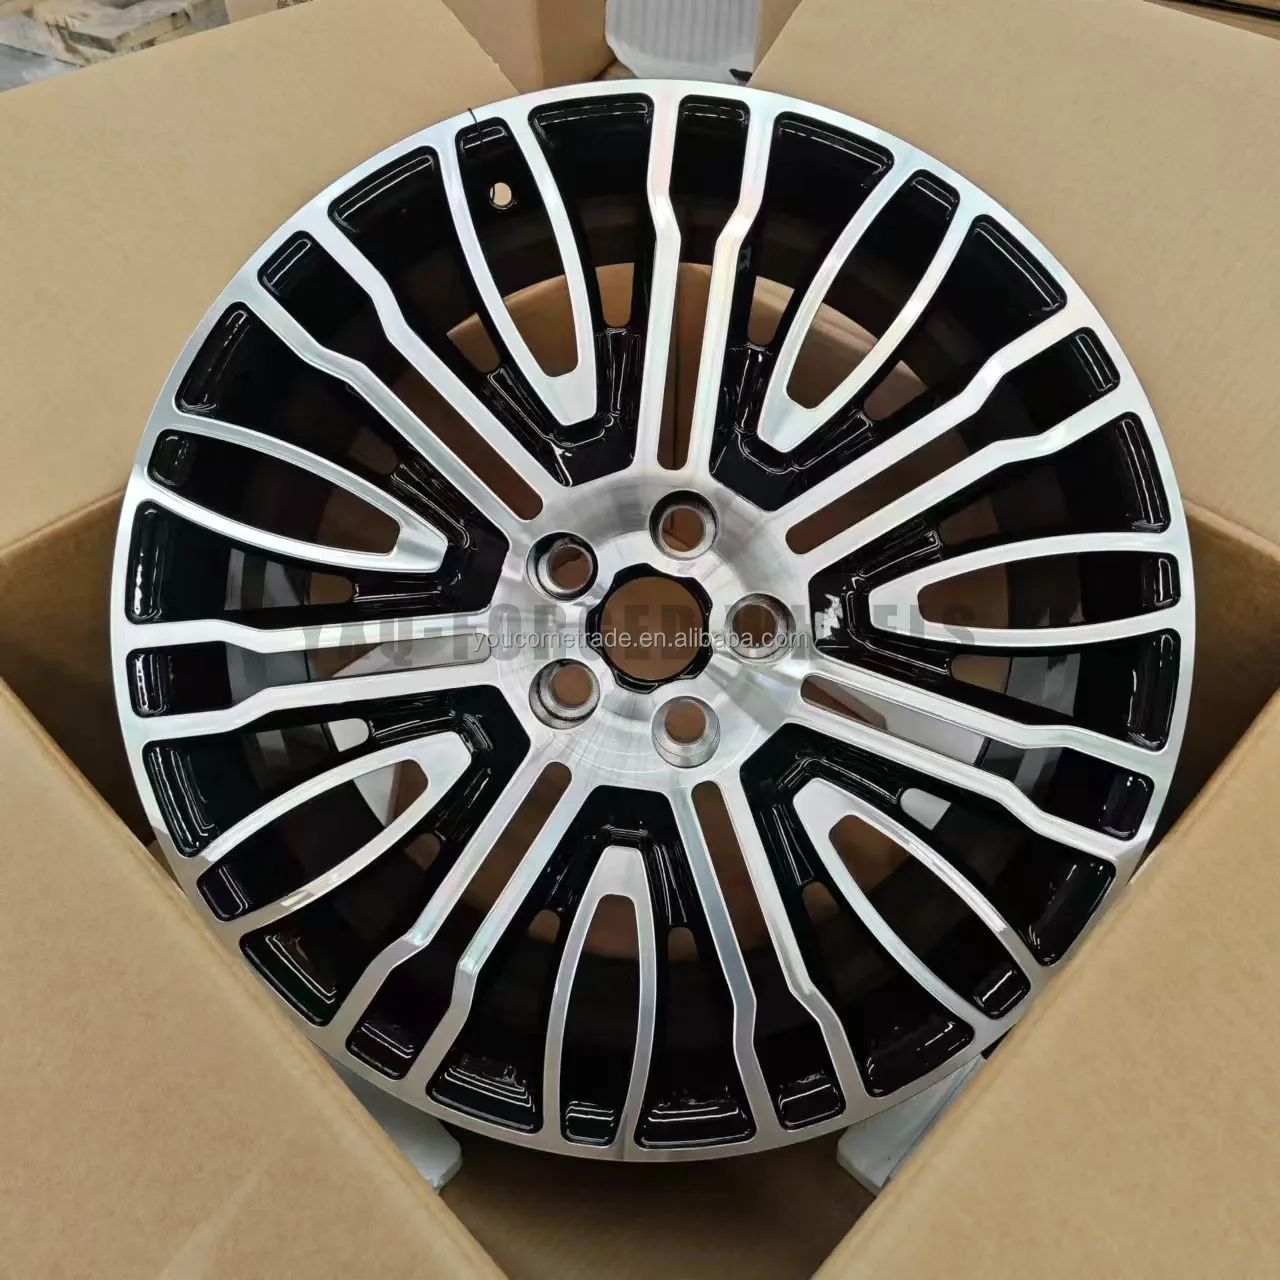 YXQ High Quality Forged Wheels 22*9.5j 5x120 New Condition Defender Wheels Rims for Range Rover Vogue Land Rover Defender